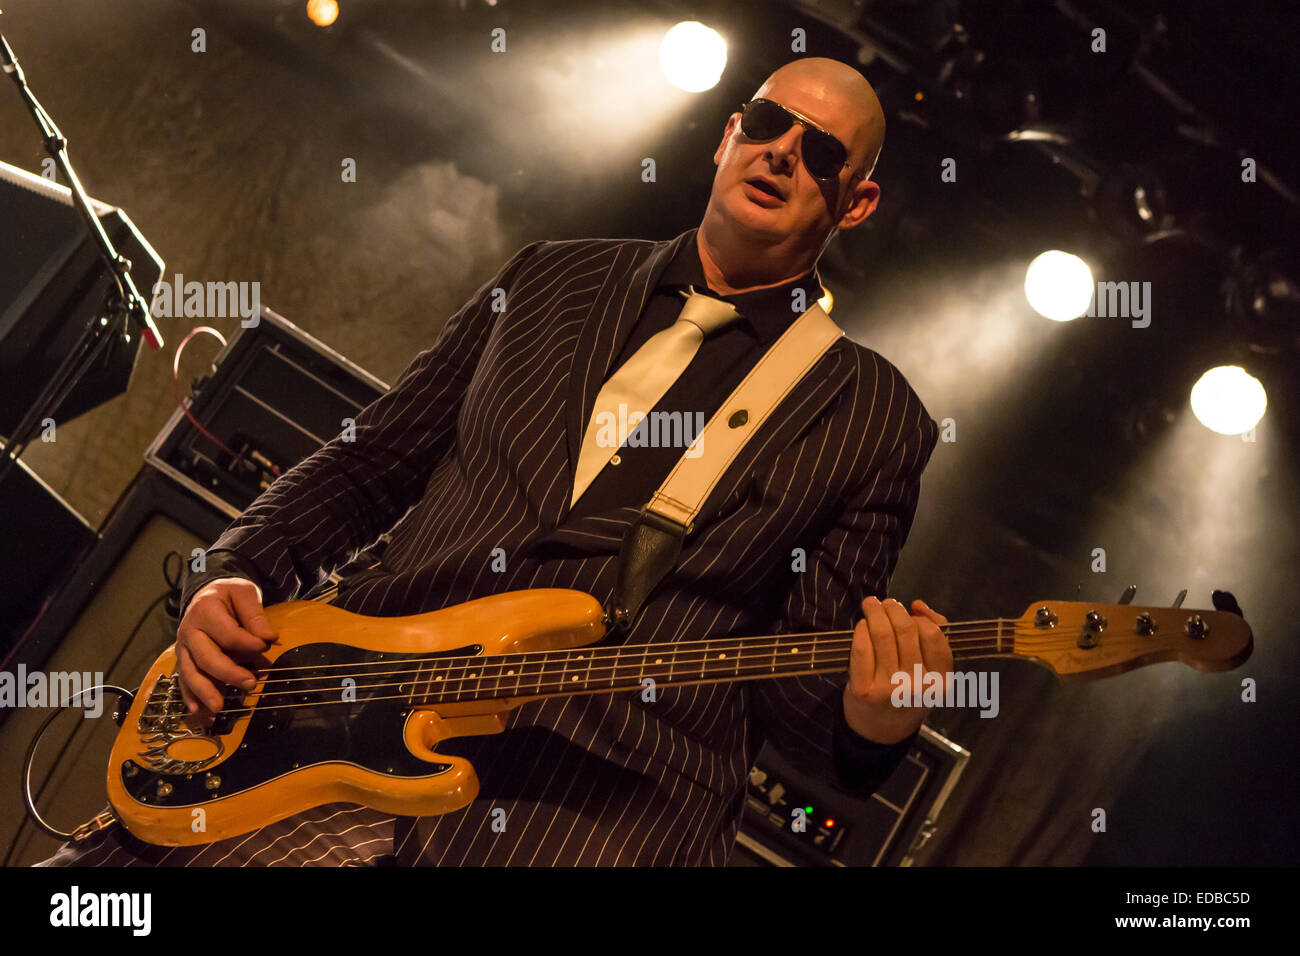 Triggerfinger High Resolution Stock Photography and Images - Alamy